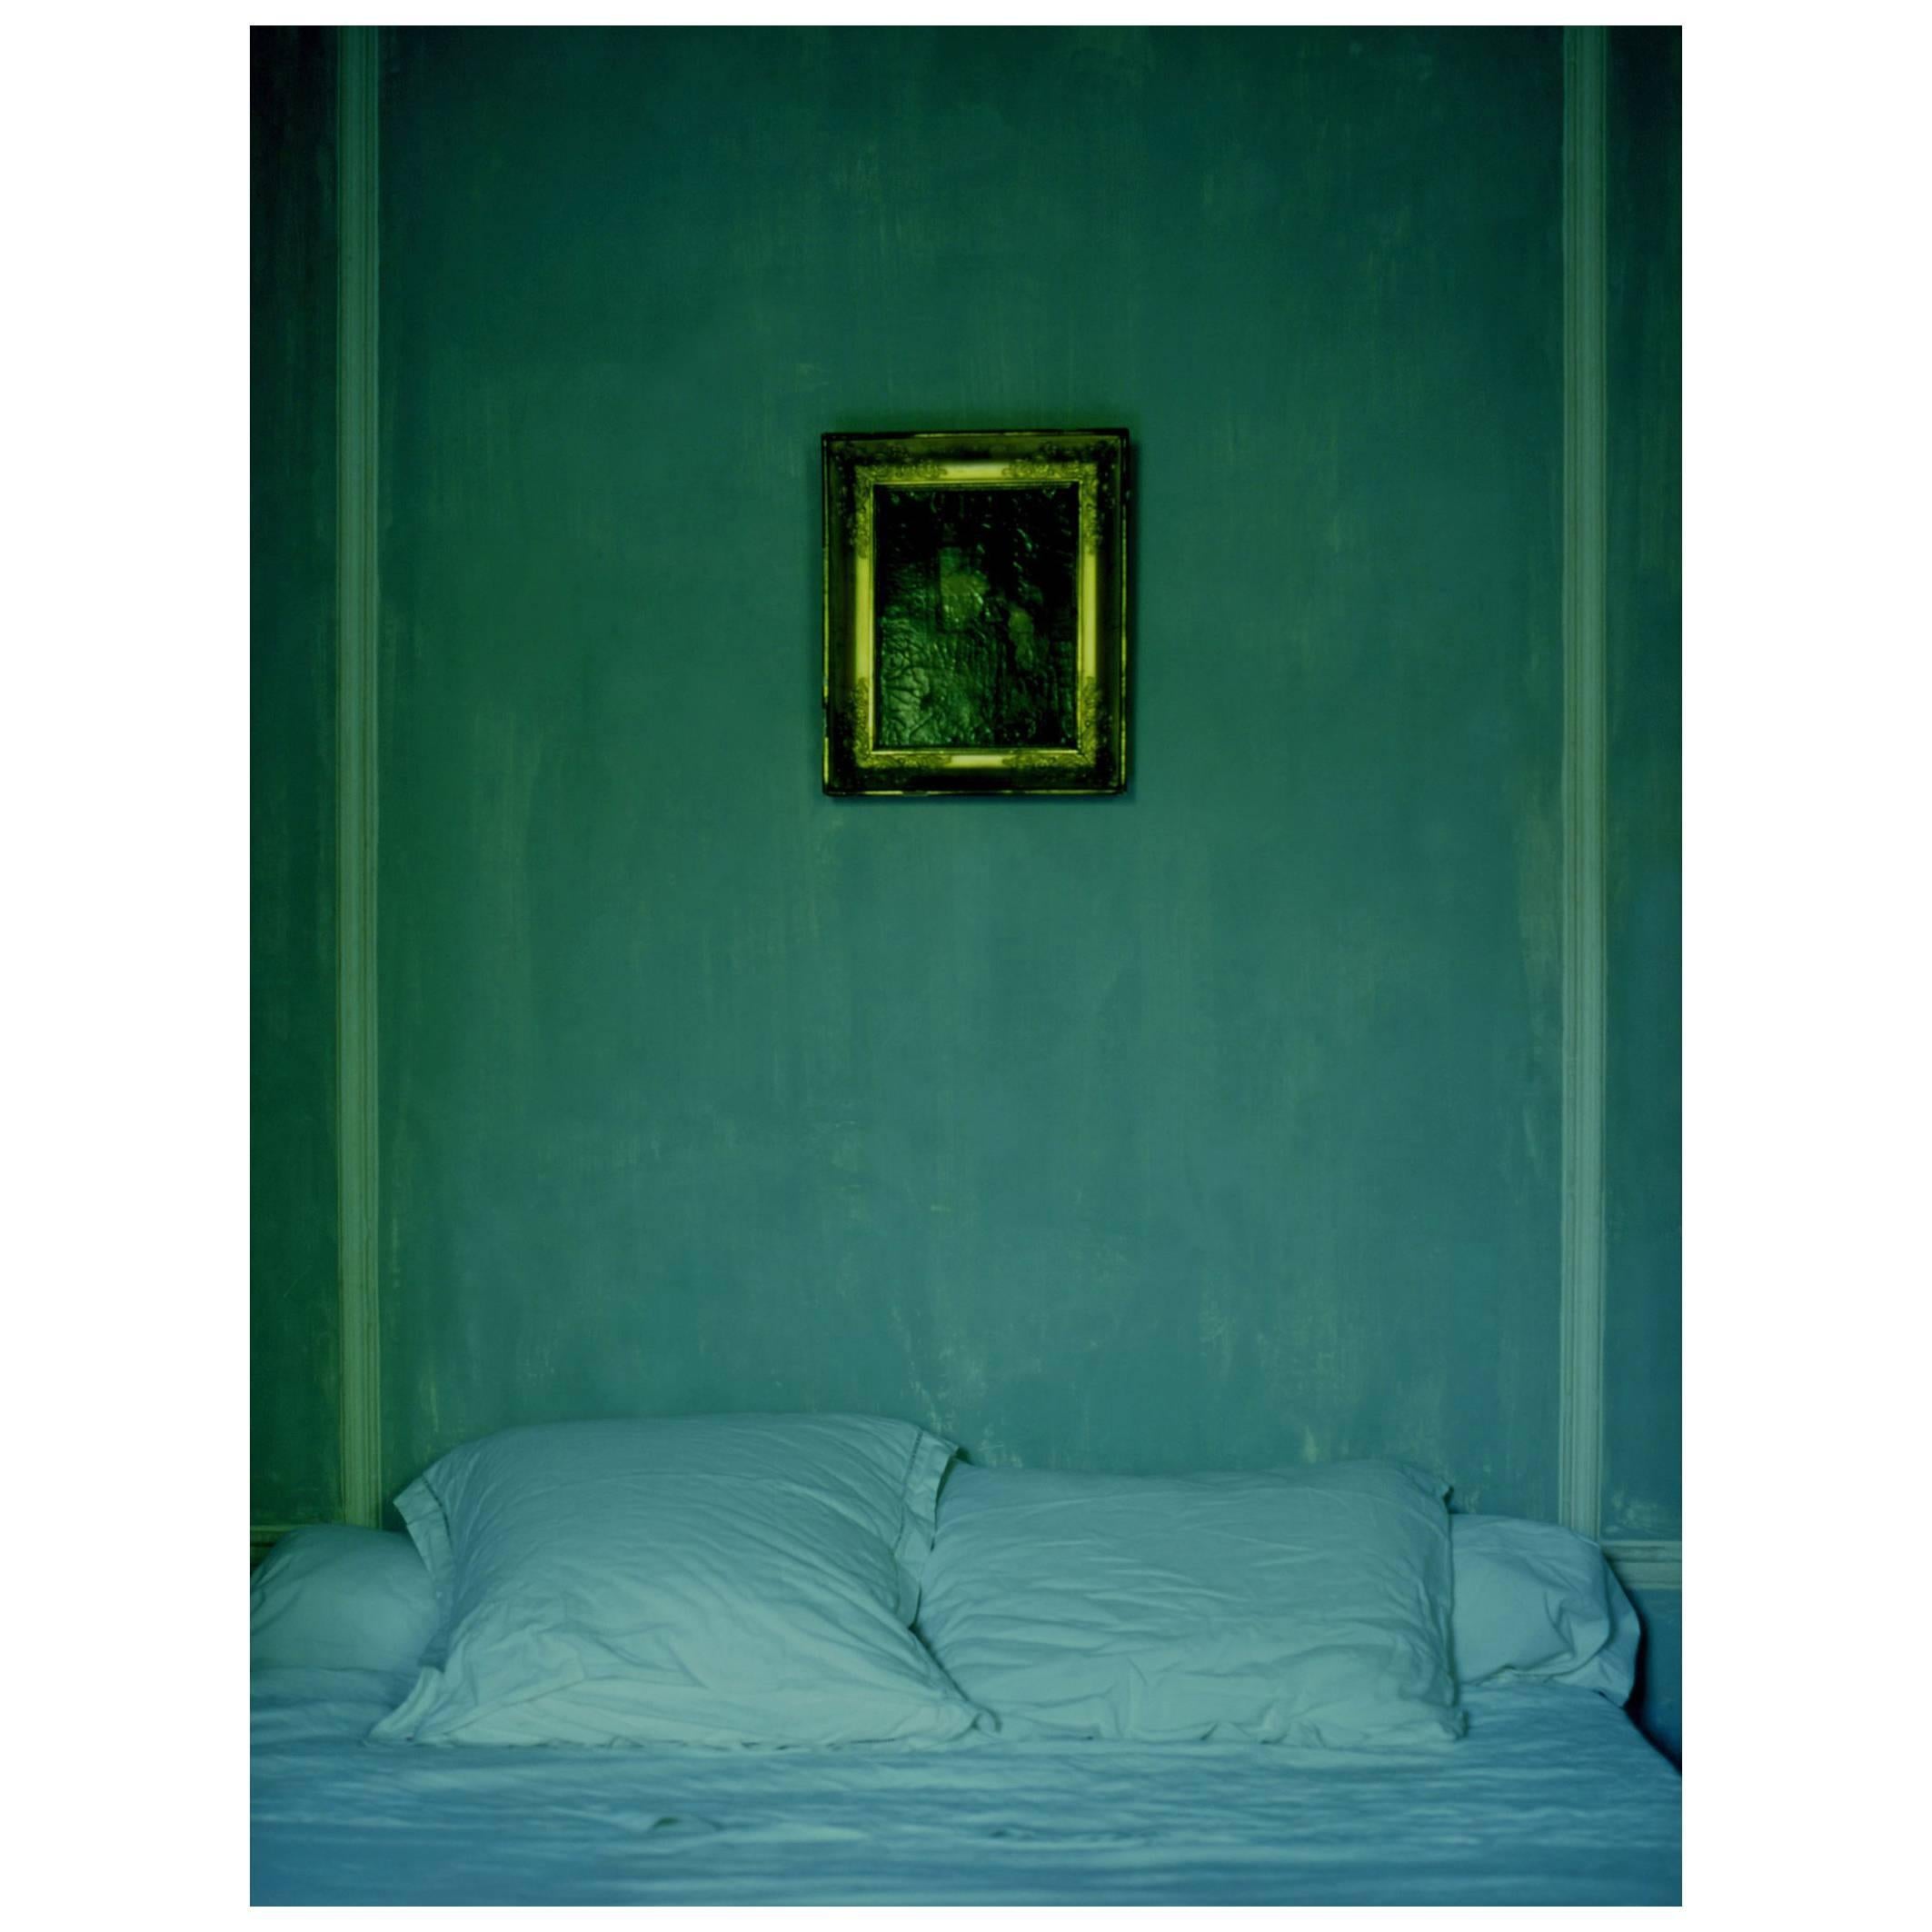 "Bed", Photograph by Liliroze For Sale